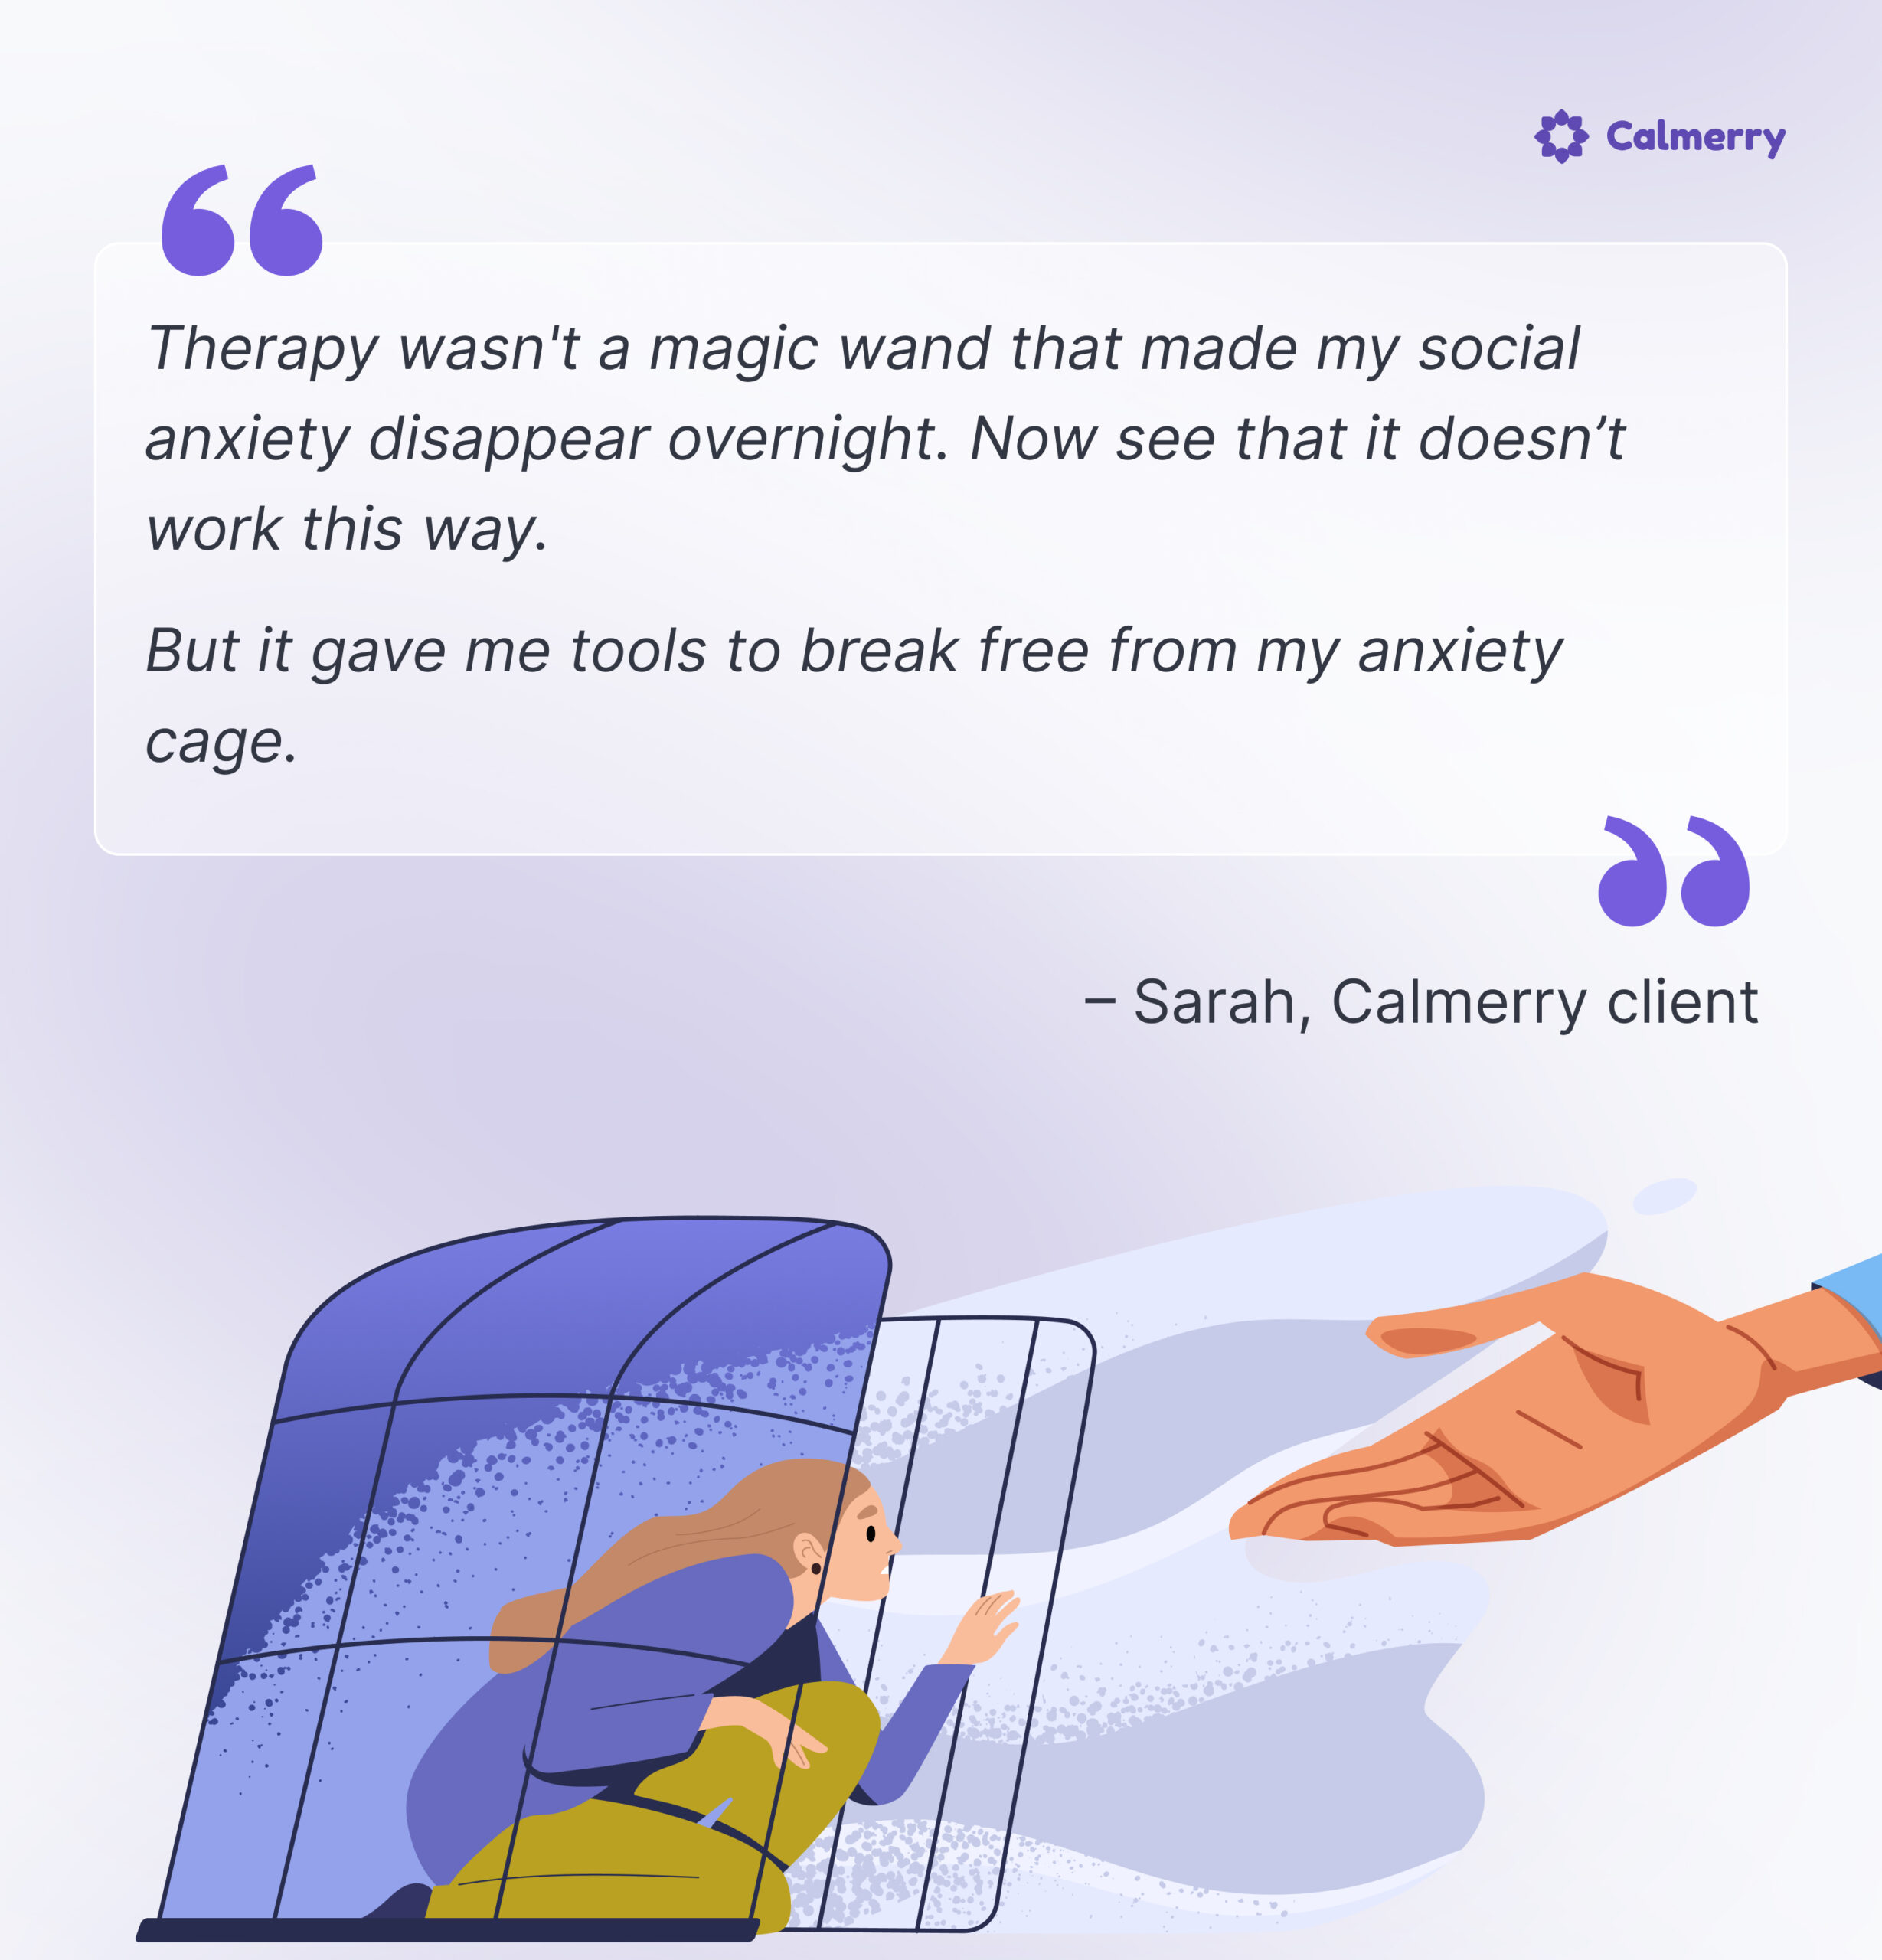 Illustration from Calmerry depicting a metaphor for overcoming social anxiety. A woman is shown stepping out from behind a transparent, cage-like structure into an extended hand, suggesting support and guidance. The image captures the concept of breaking free from the confinement of anxiety. The calming purple backdrop and a quote from 'Sarah, a Calmerry client', reinforce the theme of therapeutic progress.